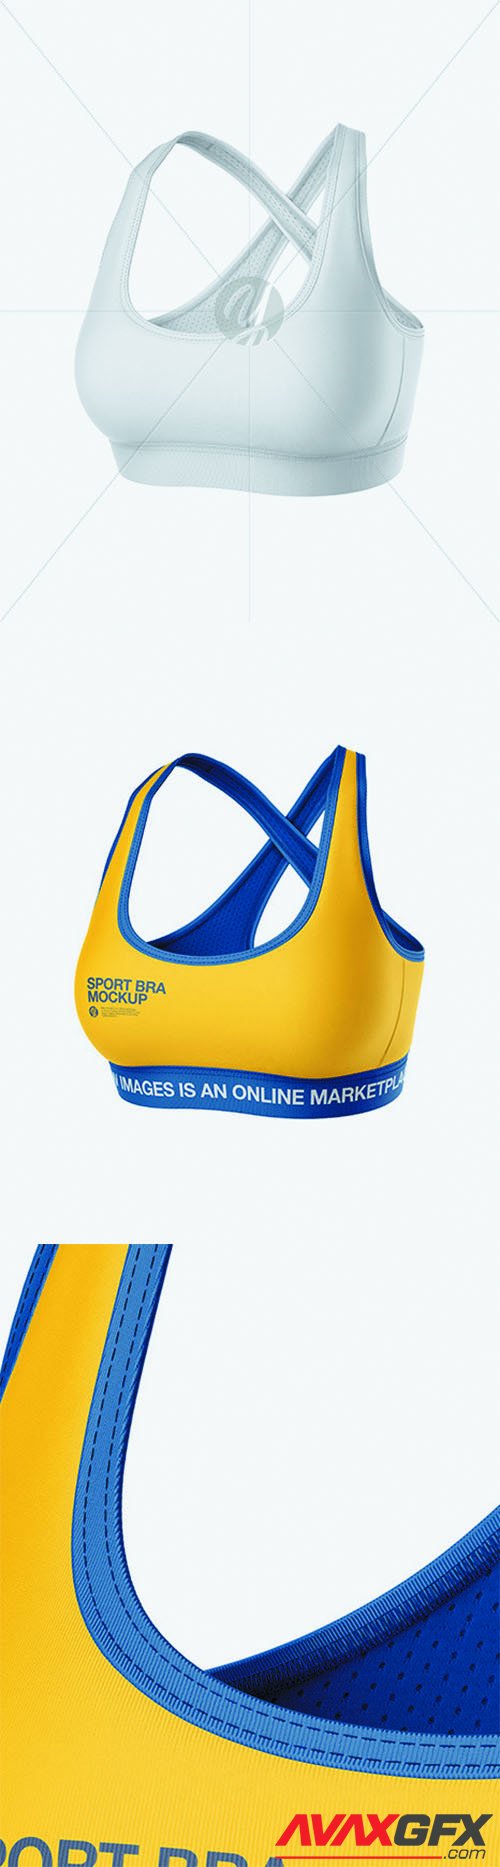 Download Women's Sports Bra Mockup - Front View 62871 » AVAXGFX - All Downloads that You Need in One ...